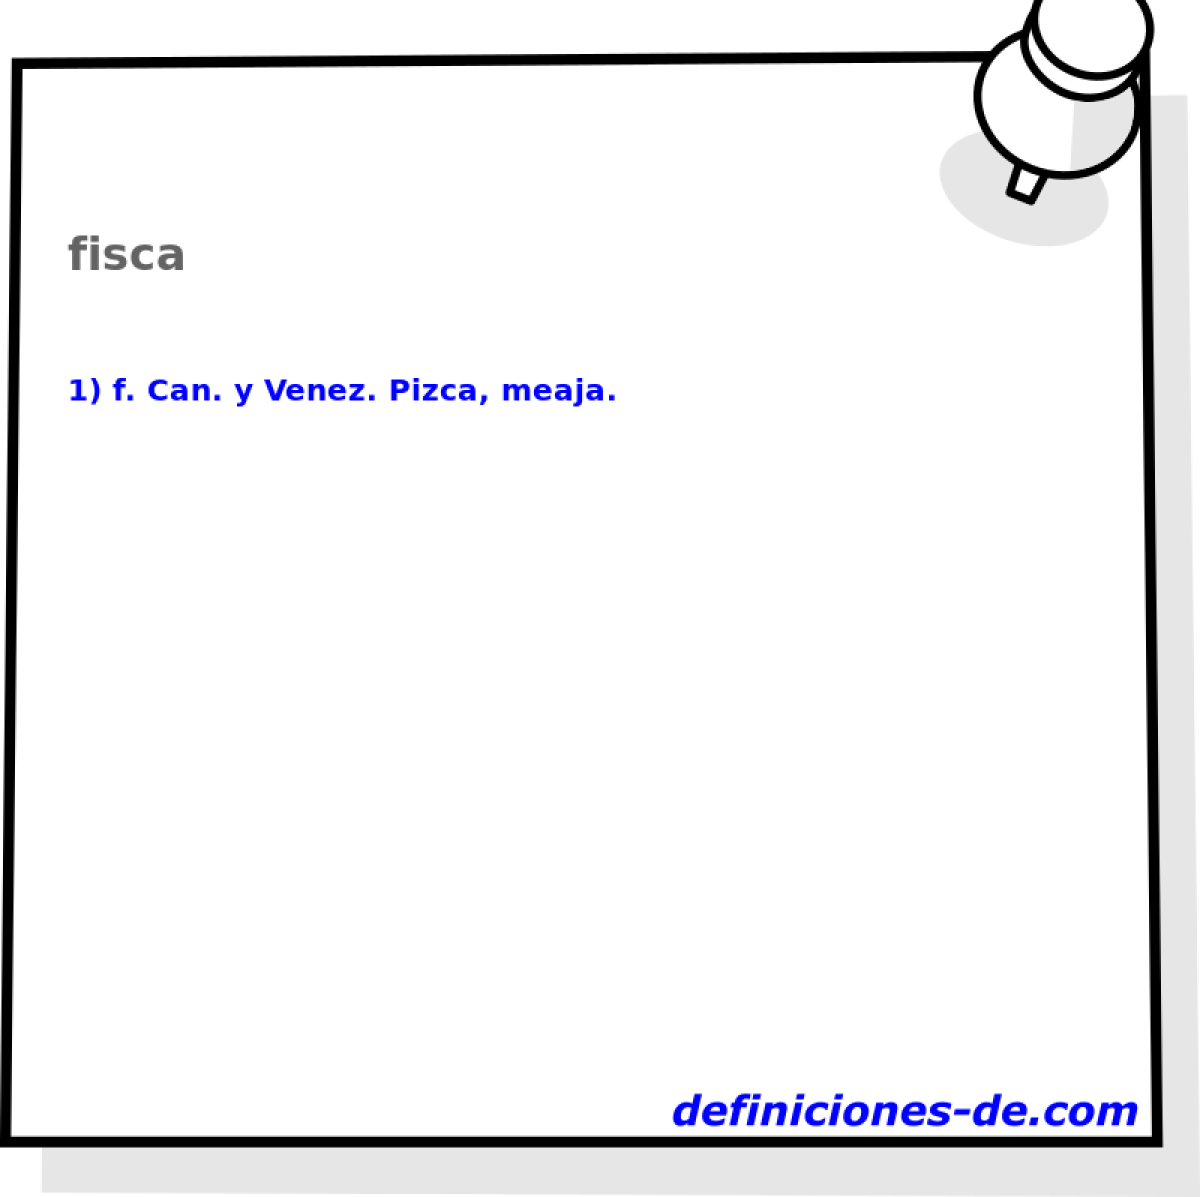 fisca 